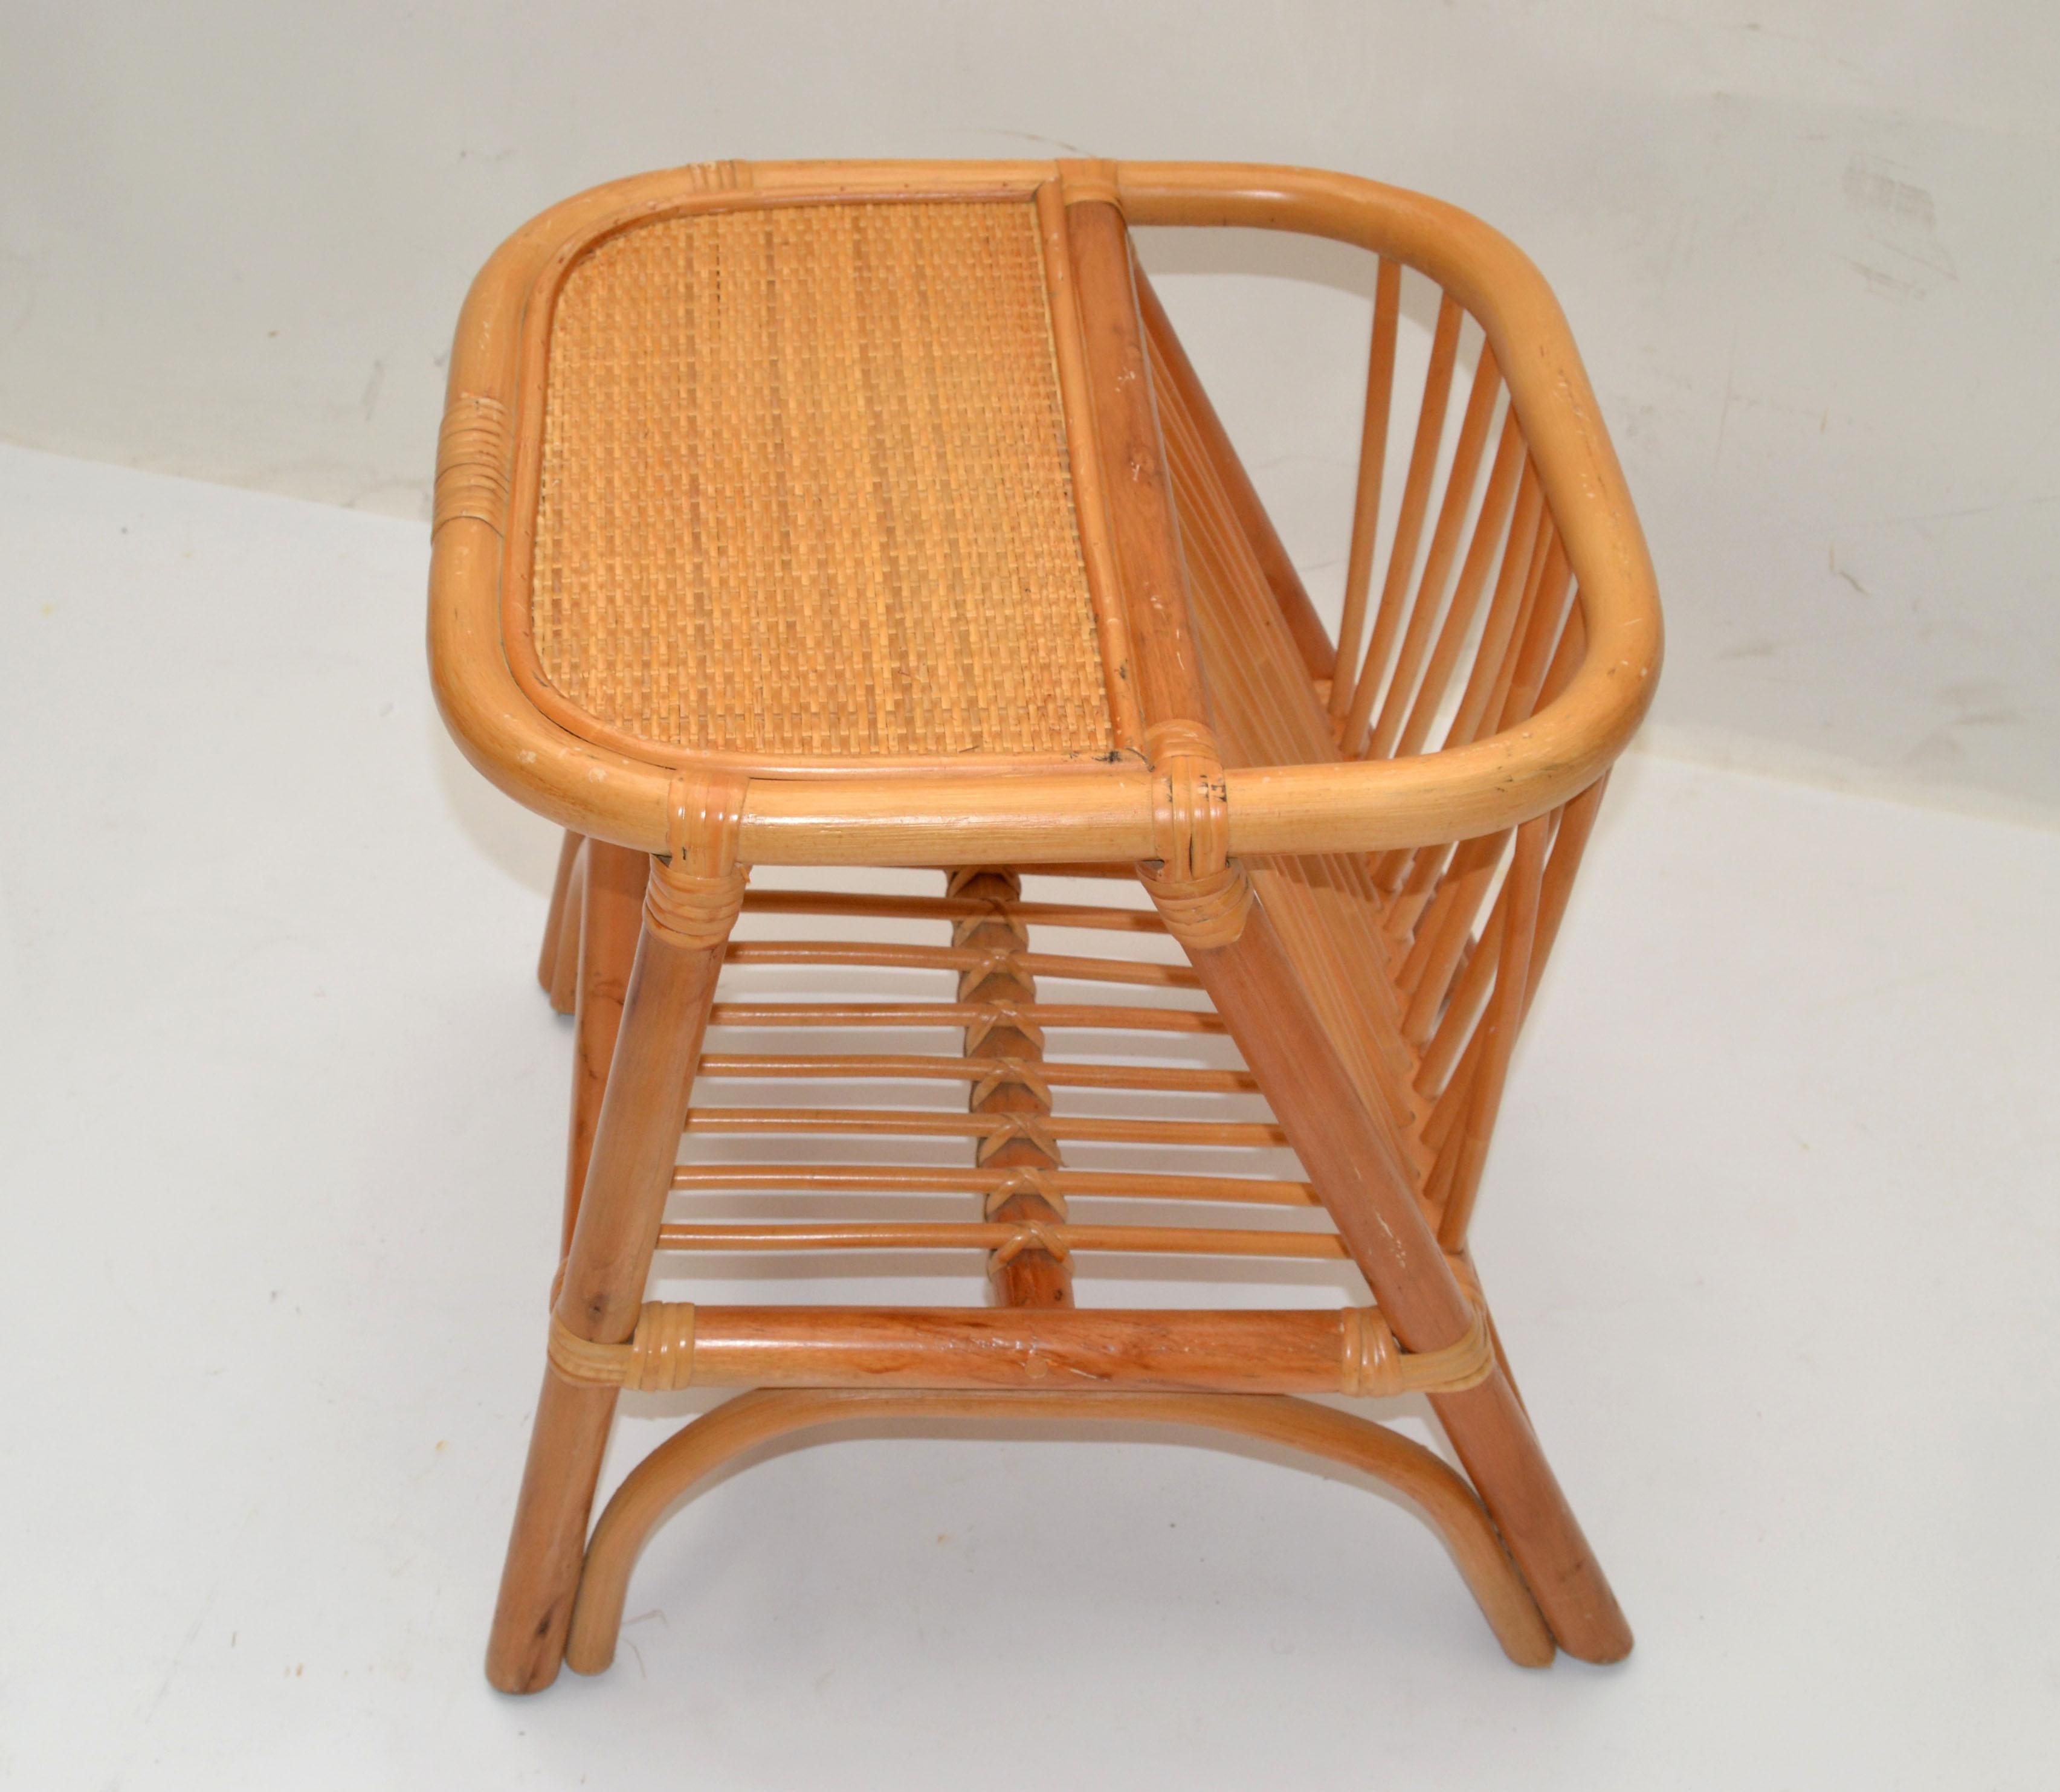 American Bohemian Mid-Century Modern Handcrafted Bamboo & Cane Magazine Rack Side Table For Sale